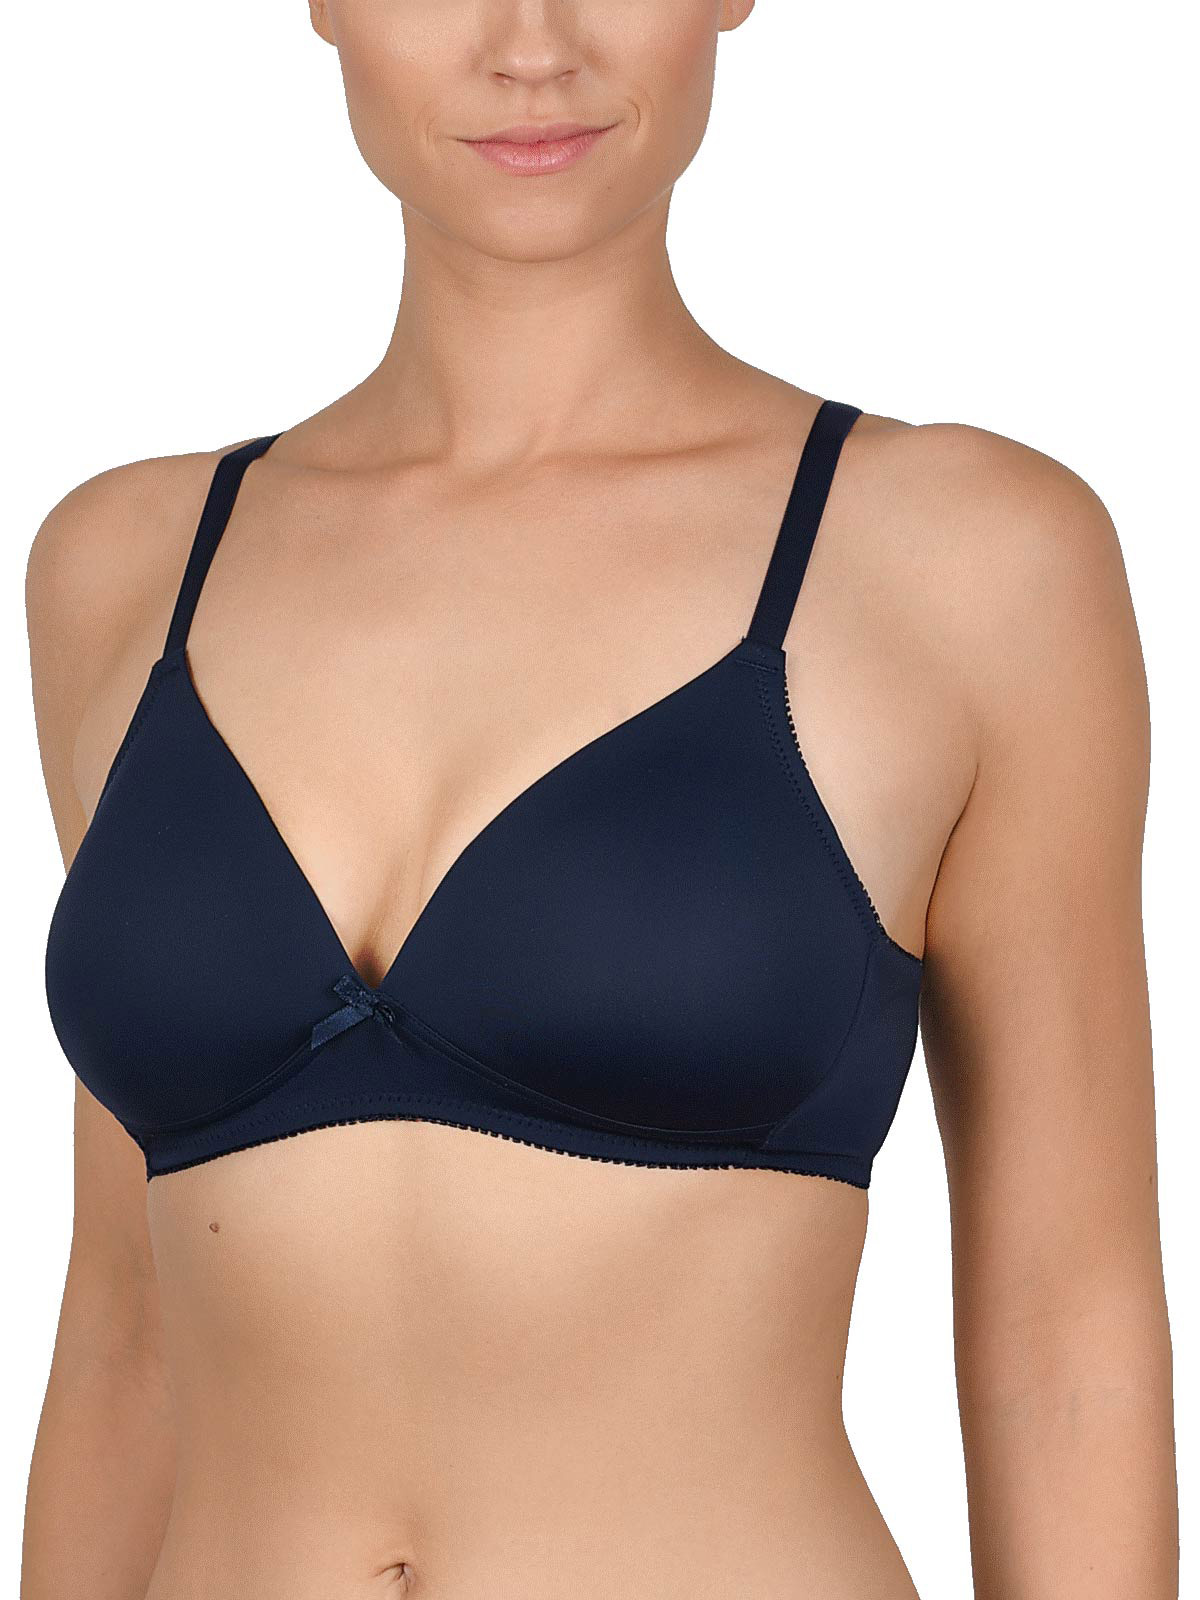 Naturana - - Naturana, Cybele ASSORTED Soft Cup Bras - Size 34 to 44 (B cup)